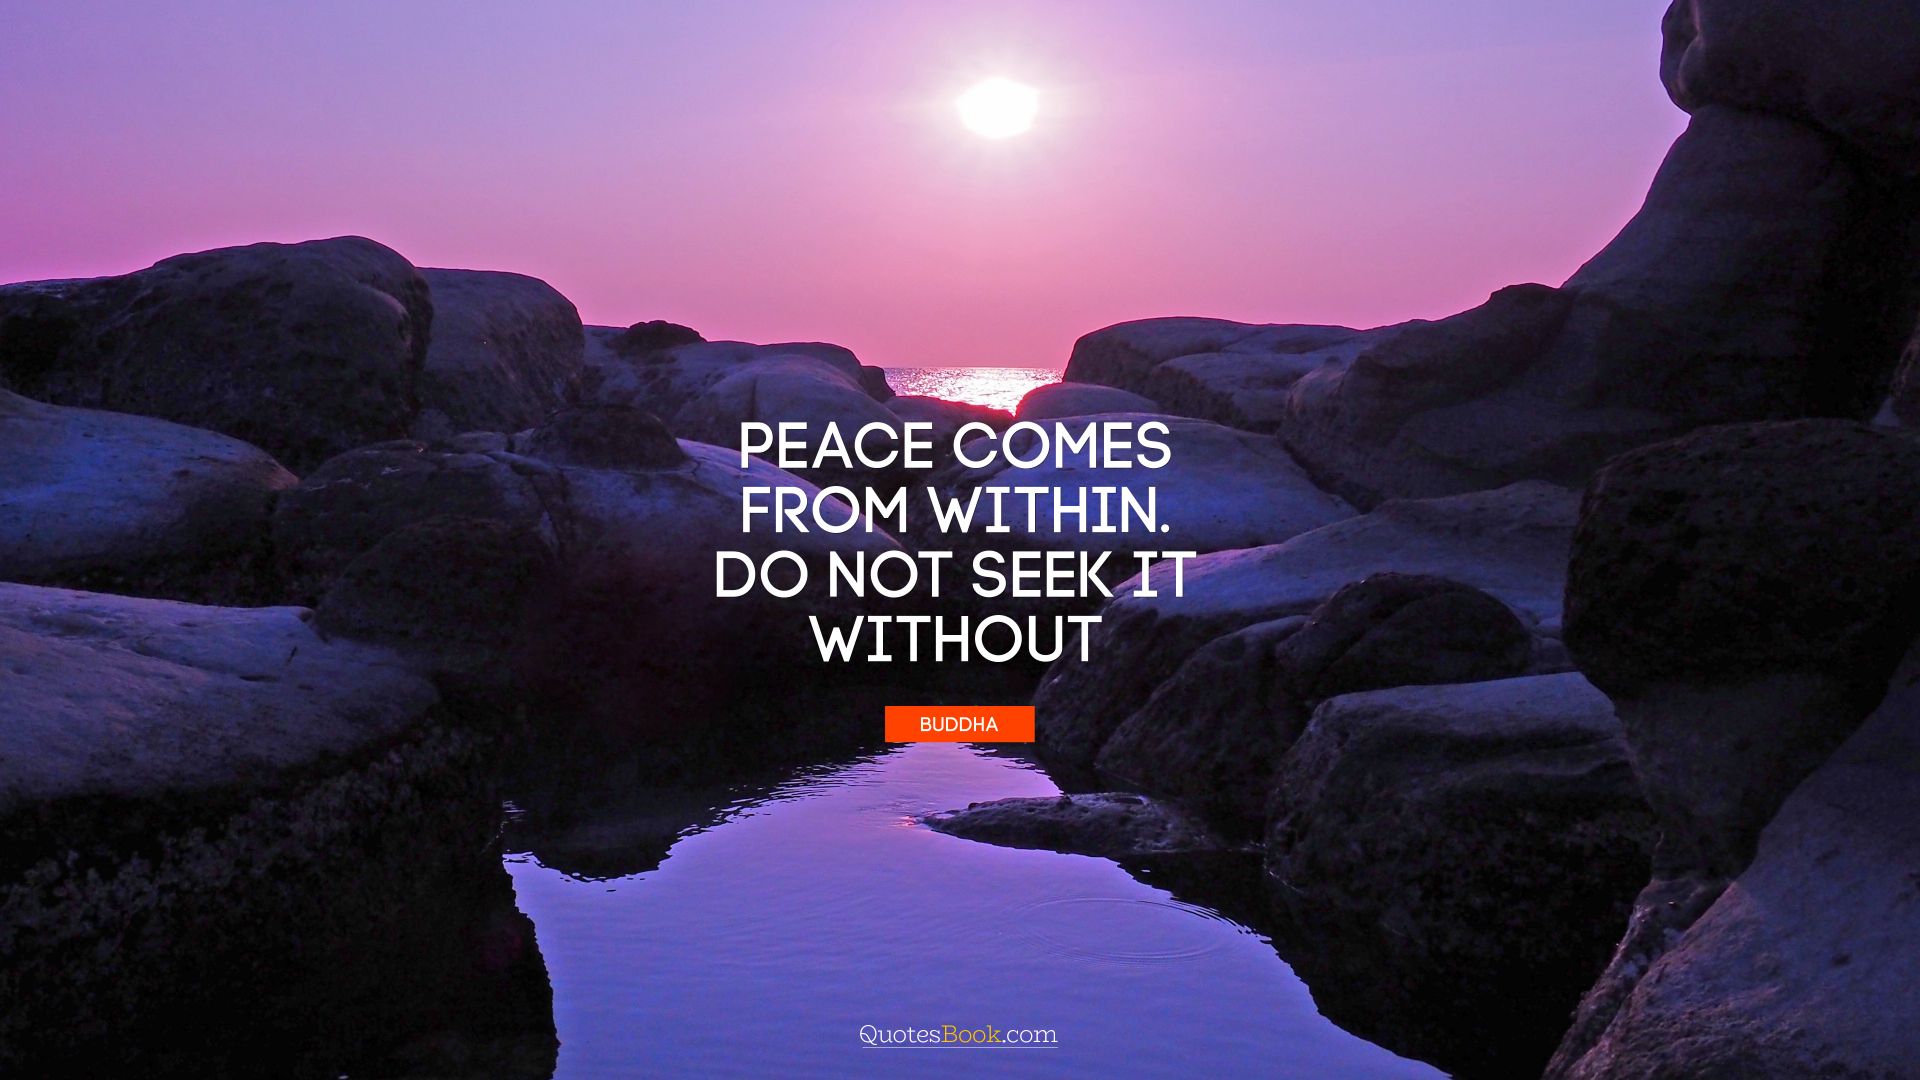 Peace comes from within. Do not seek it without. - Quote by Buddha